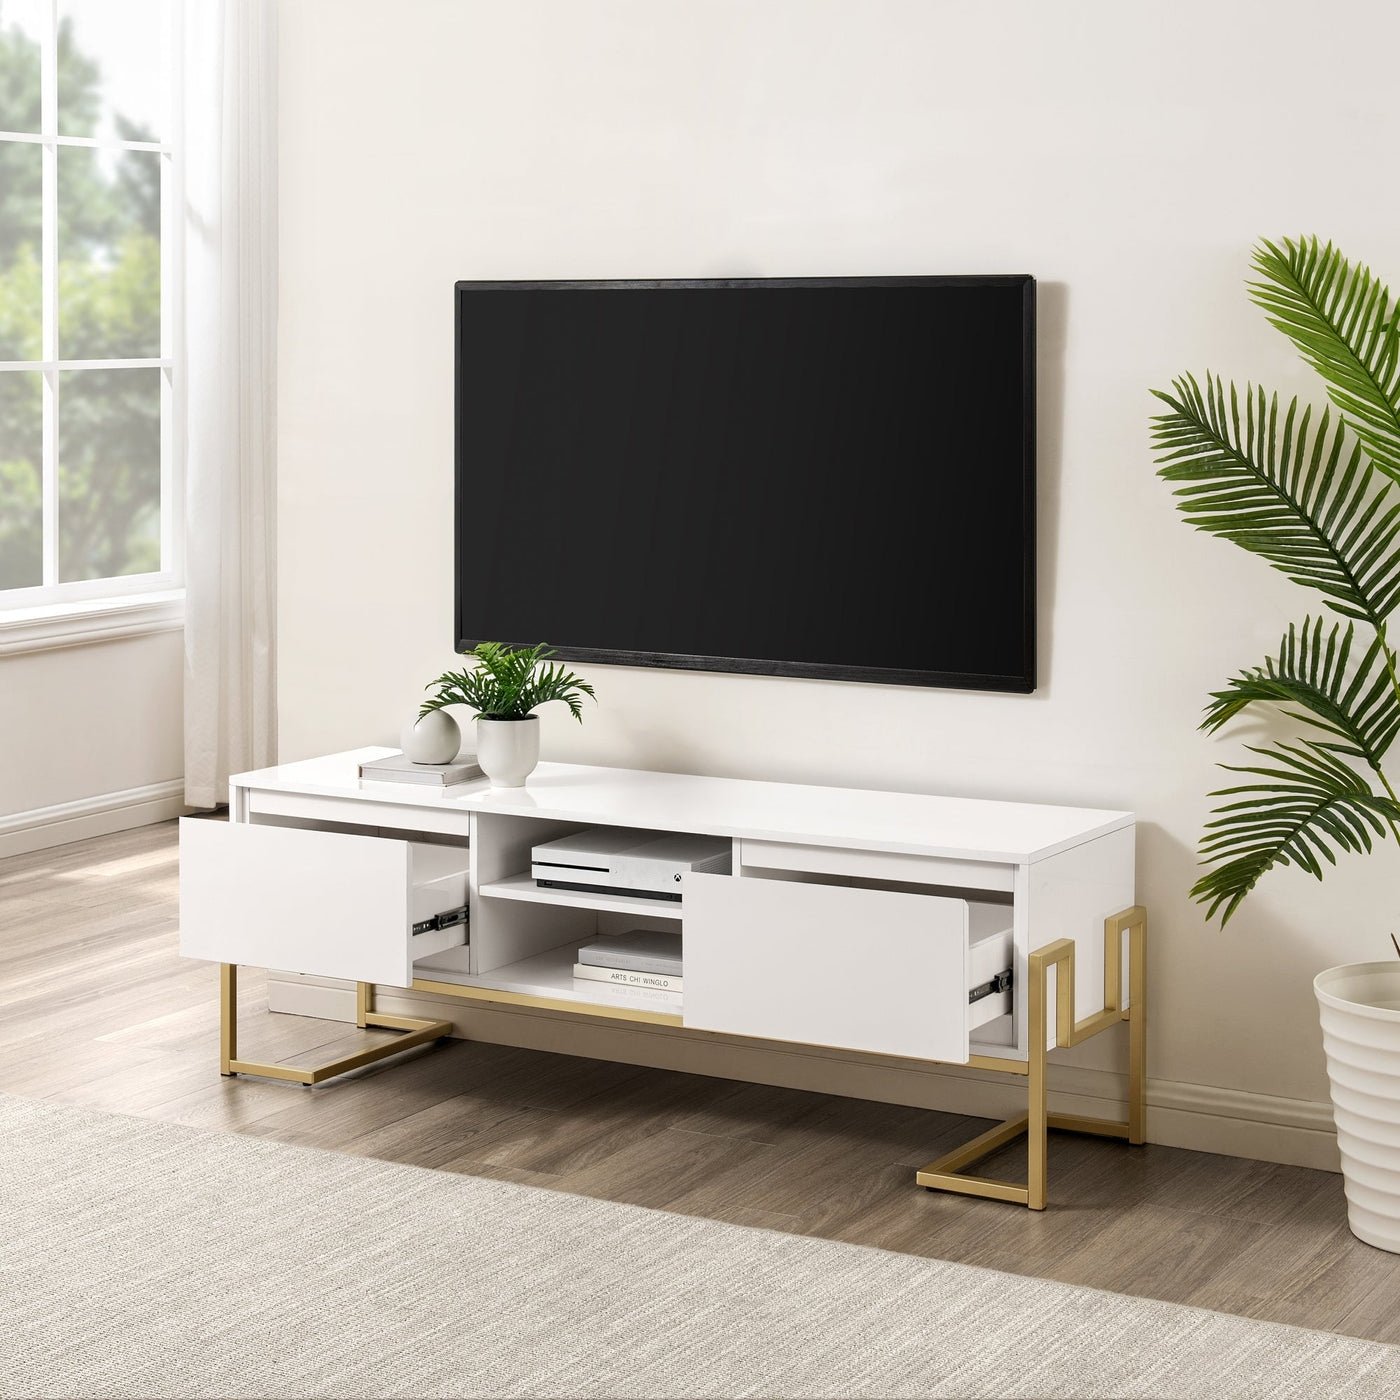 60" 2-Drawer Modern Media Console - Solid White - Image 1